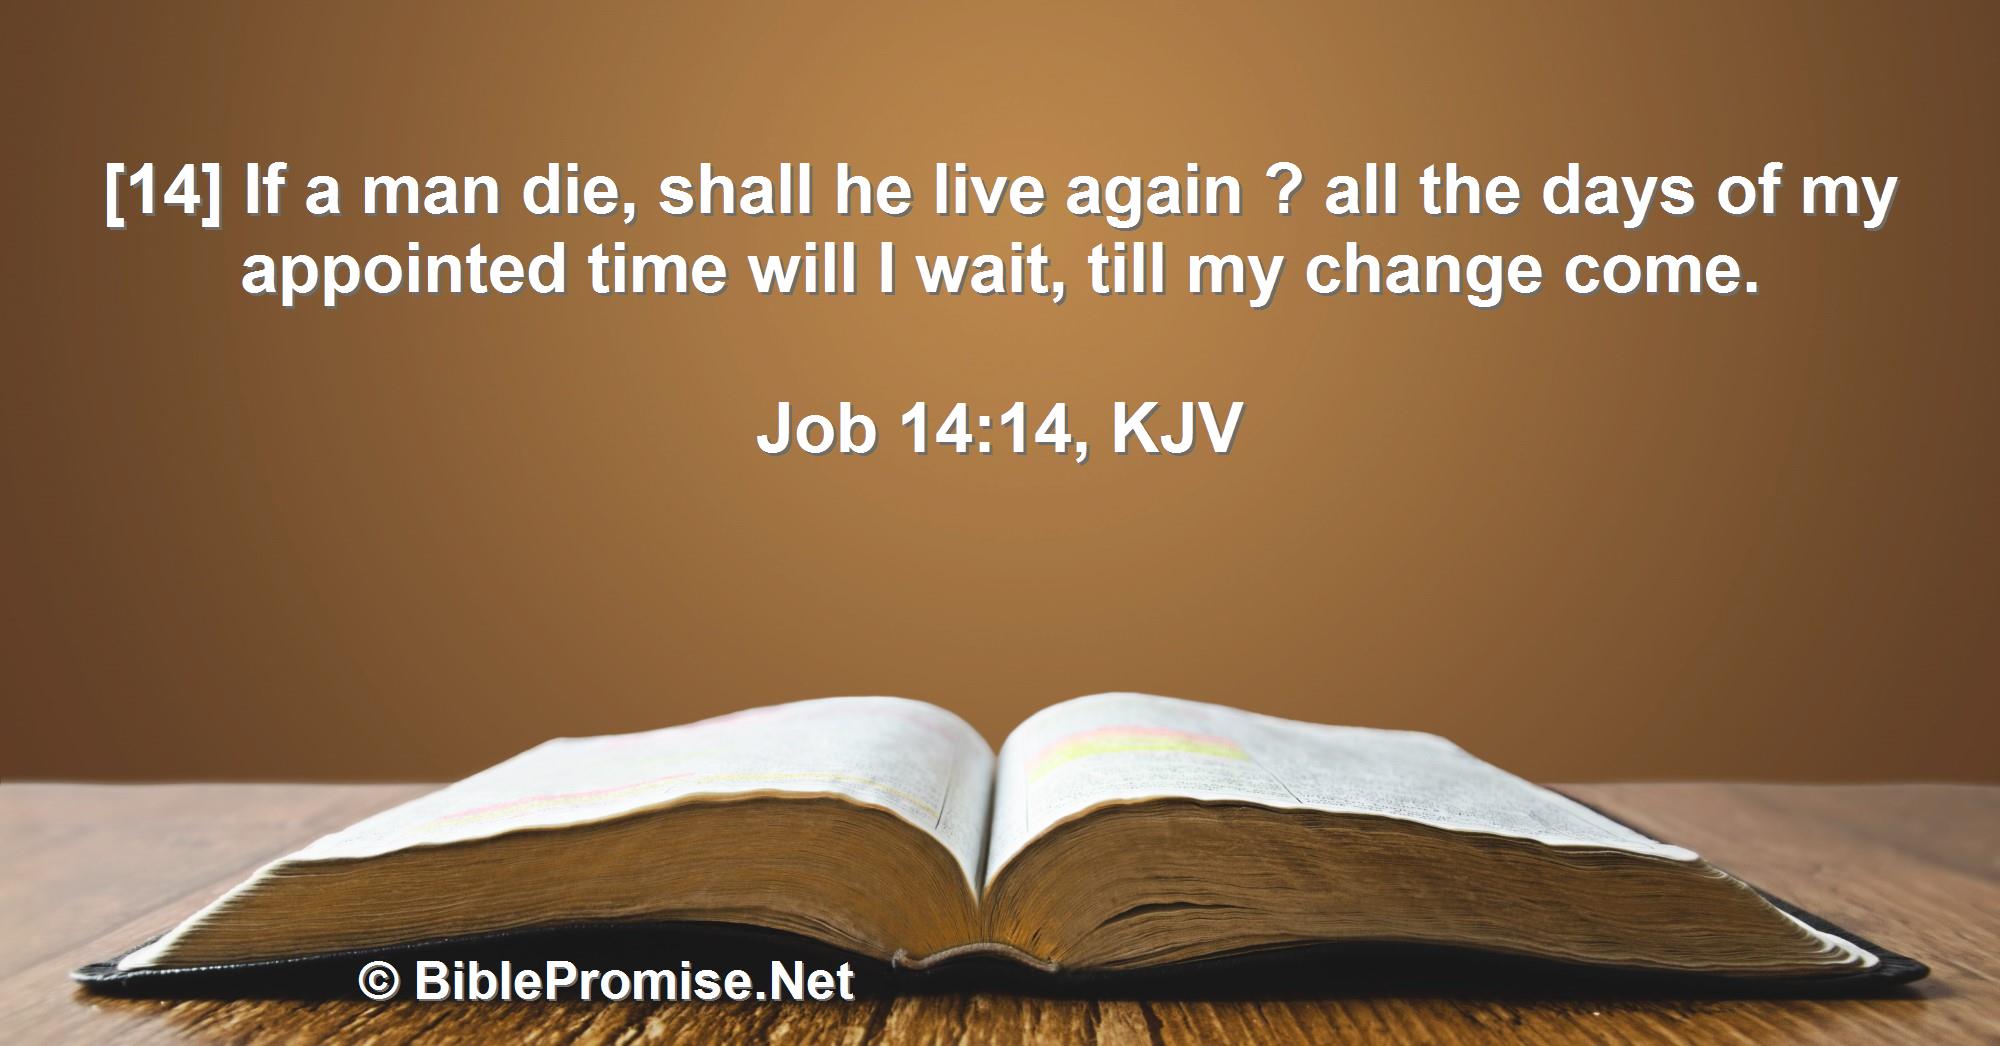 Friday, June 9, 2023 - Job 14:14 (KJV) - Bible promise that God will change us at appointed time.